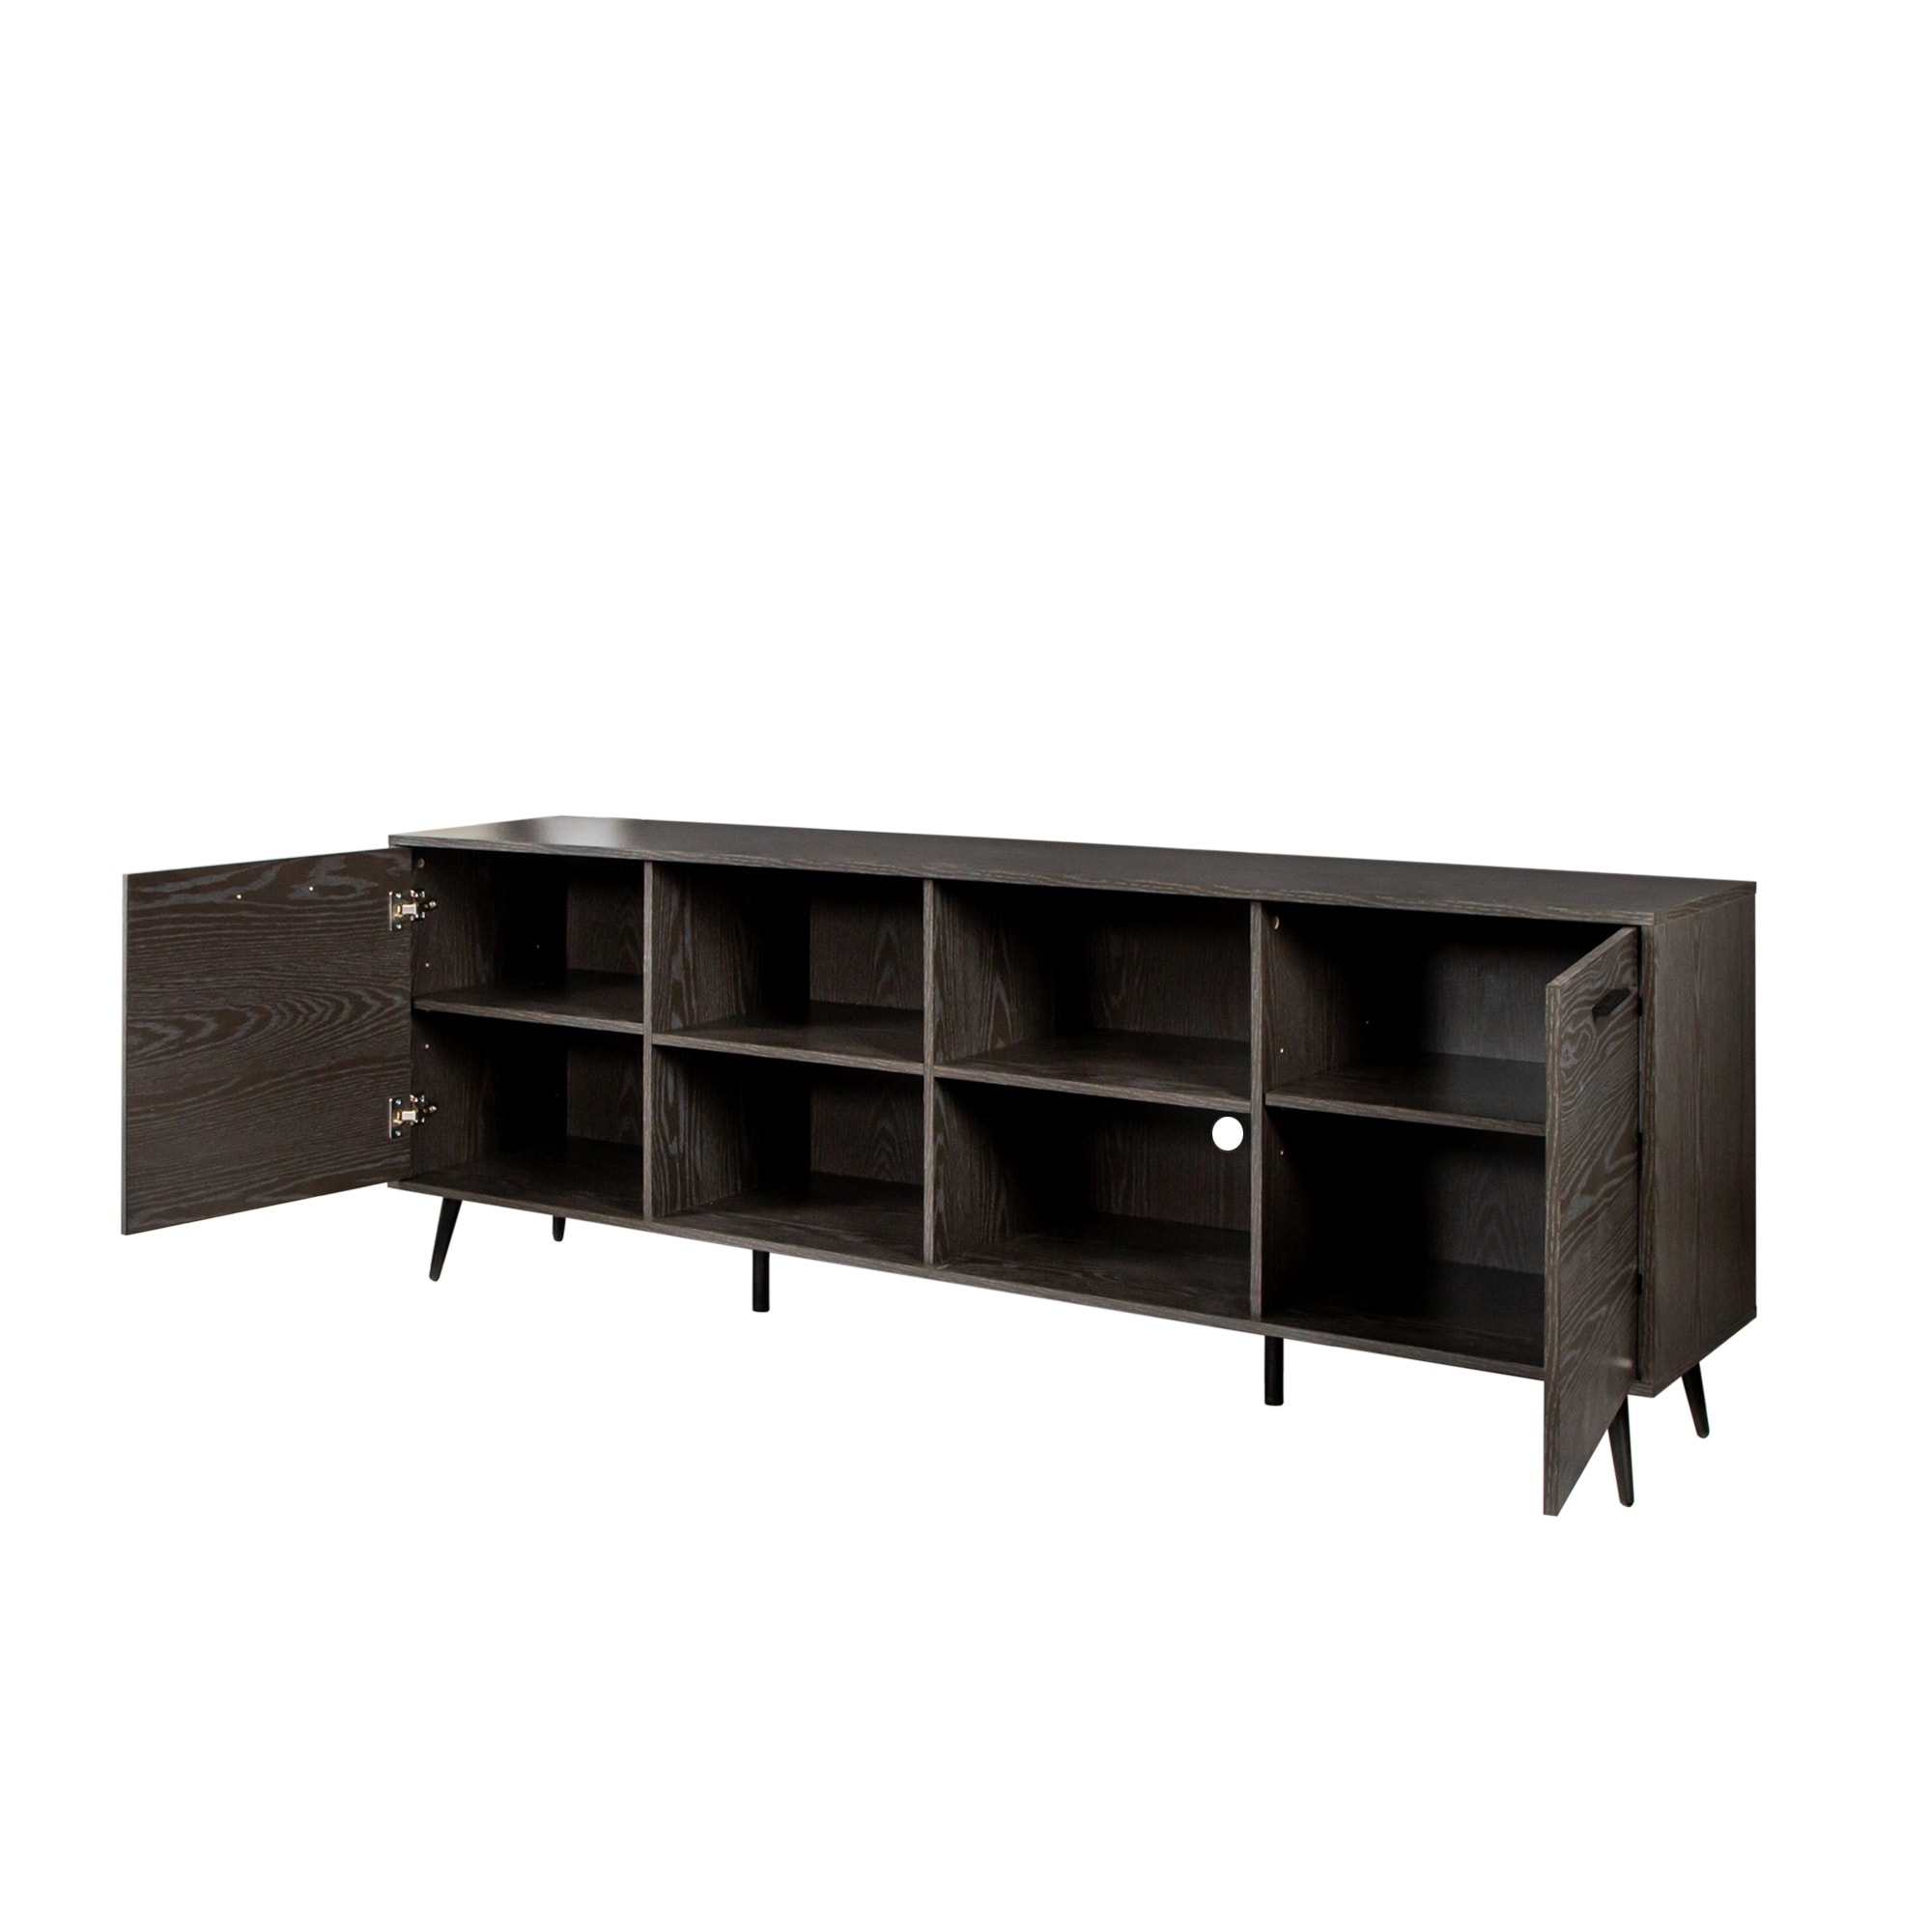 TV Stand Media Entertainment Center Mid-Century Modern TV Console Table with Storage Cabinet Doors for Living Room